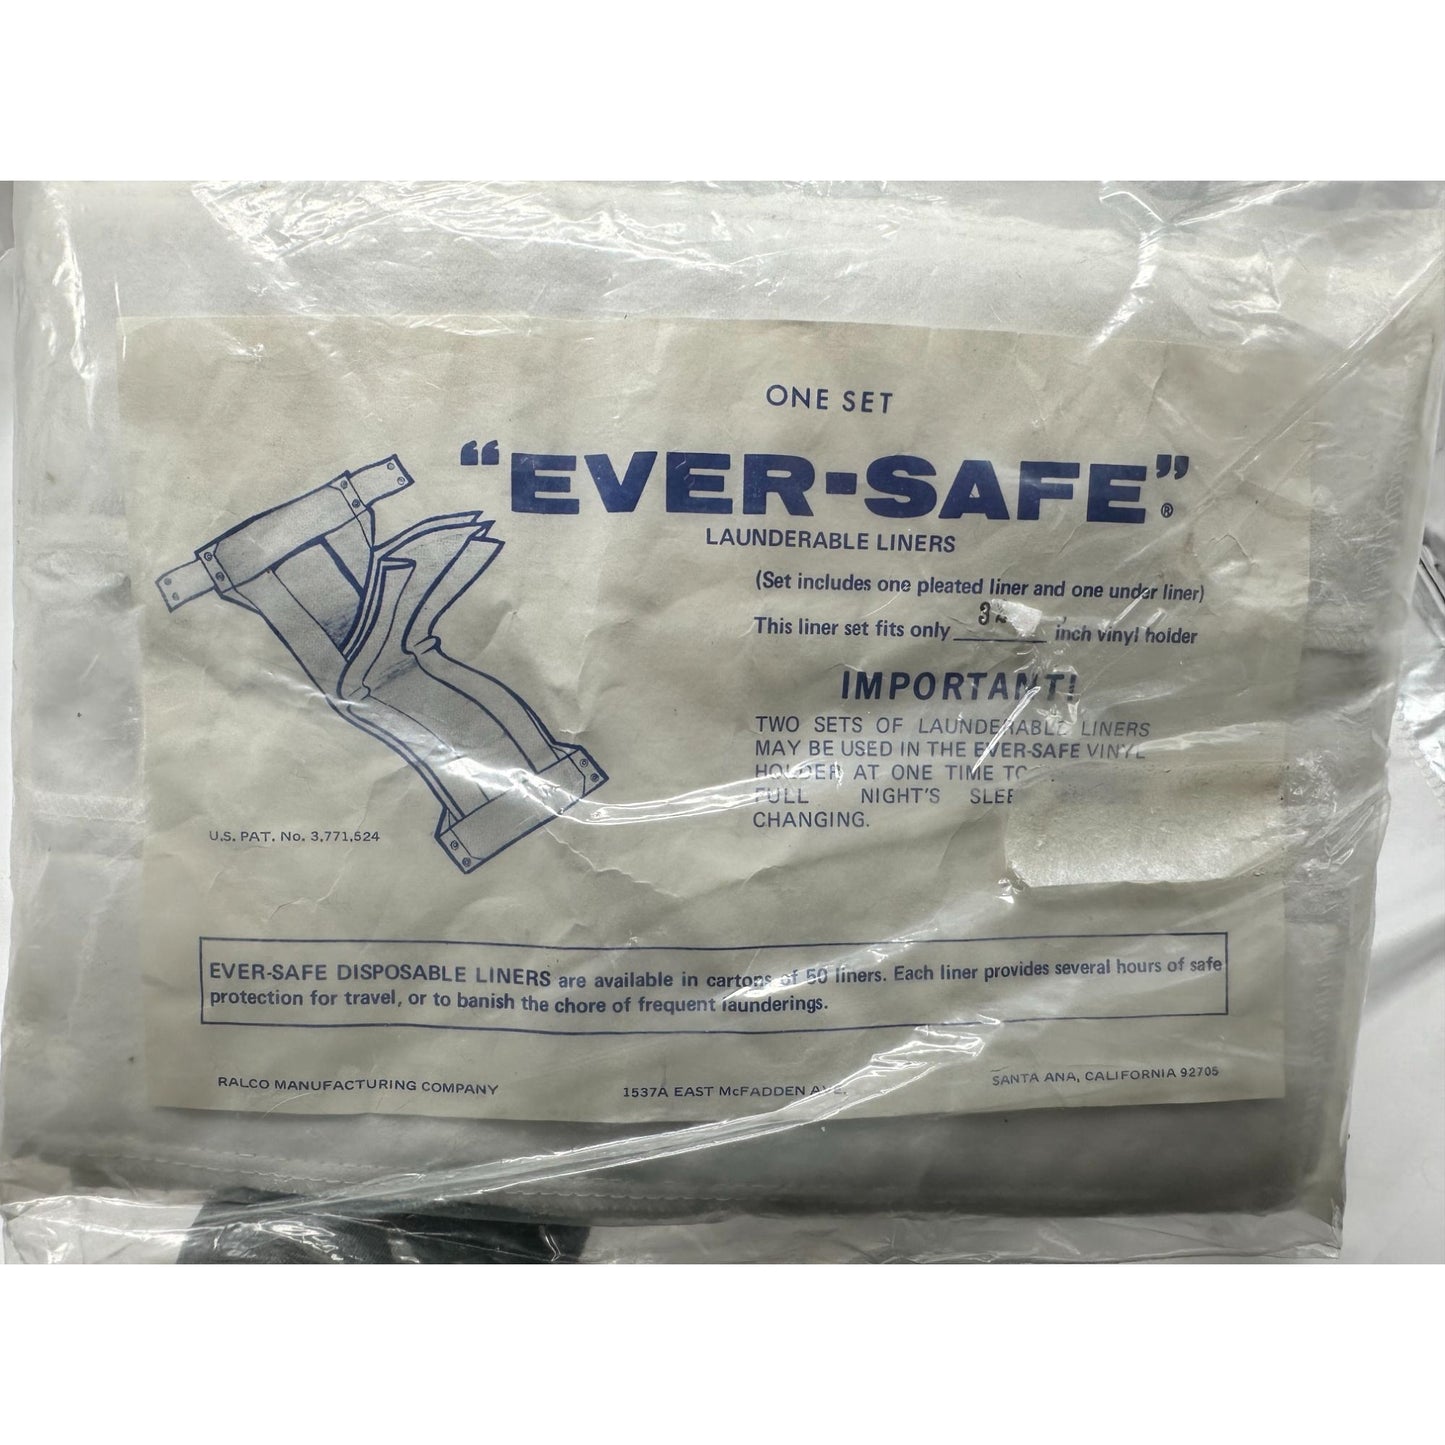 Ever-safe Launderable Liners One Complete Set New Ready for a Fresh Start